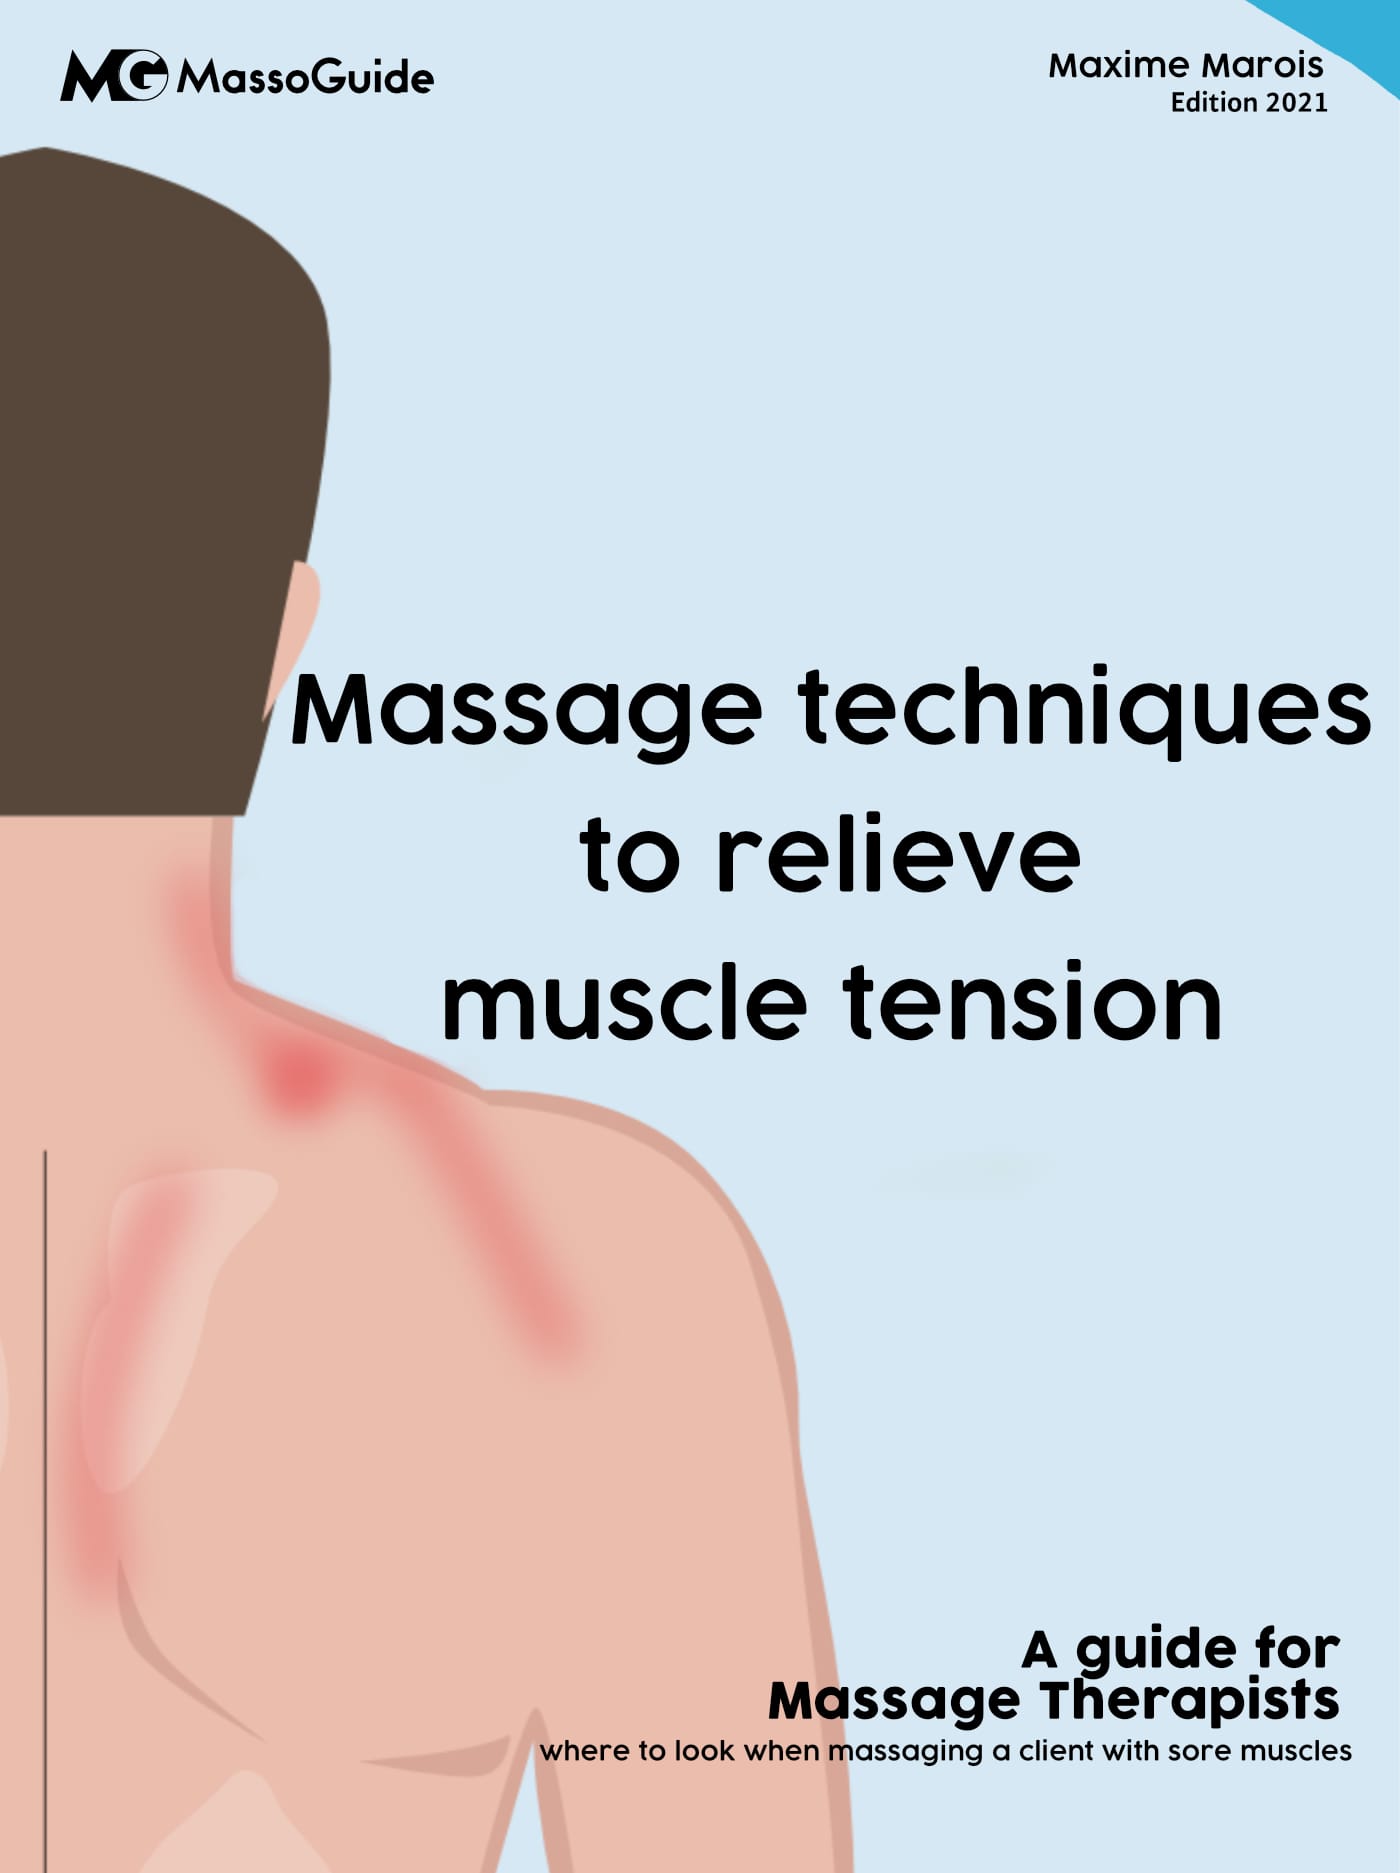 5 massage techniques to relieve tension at home, from a